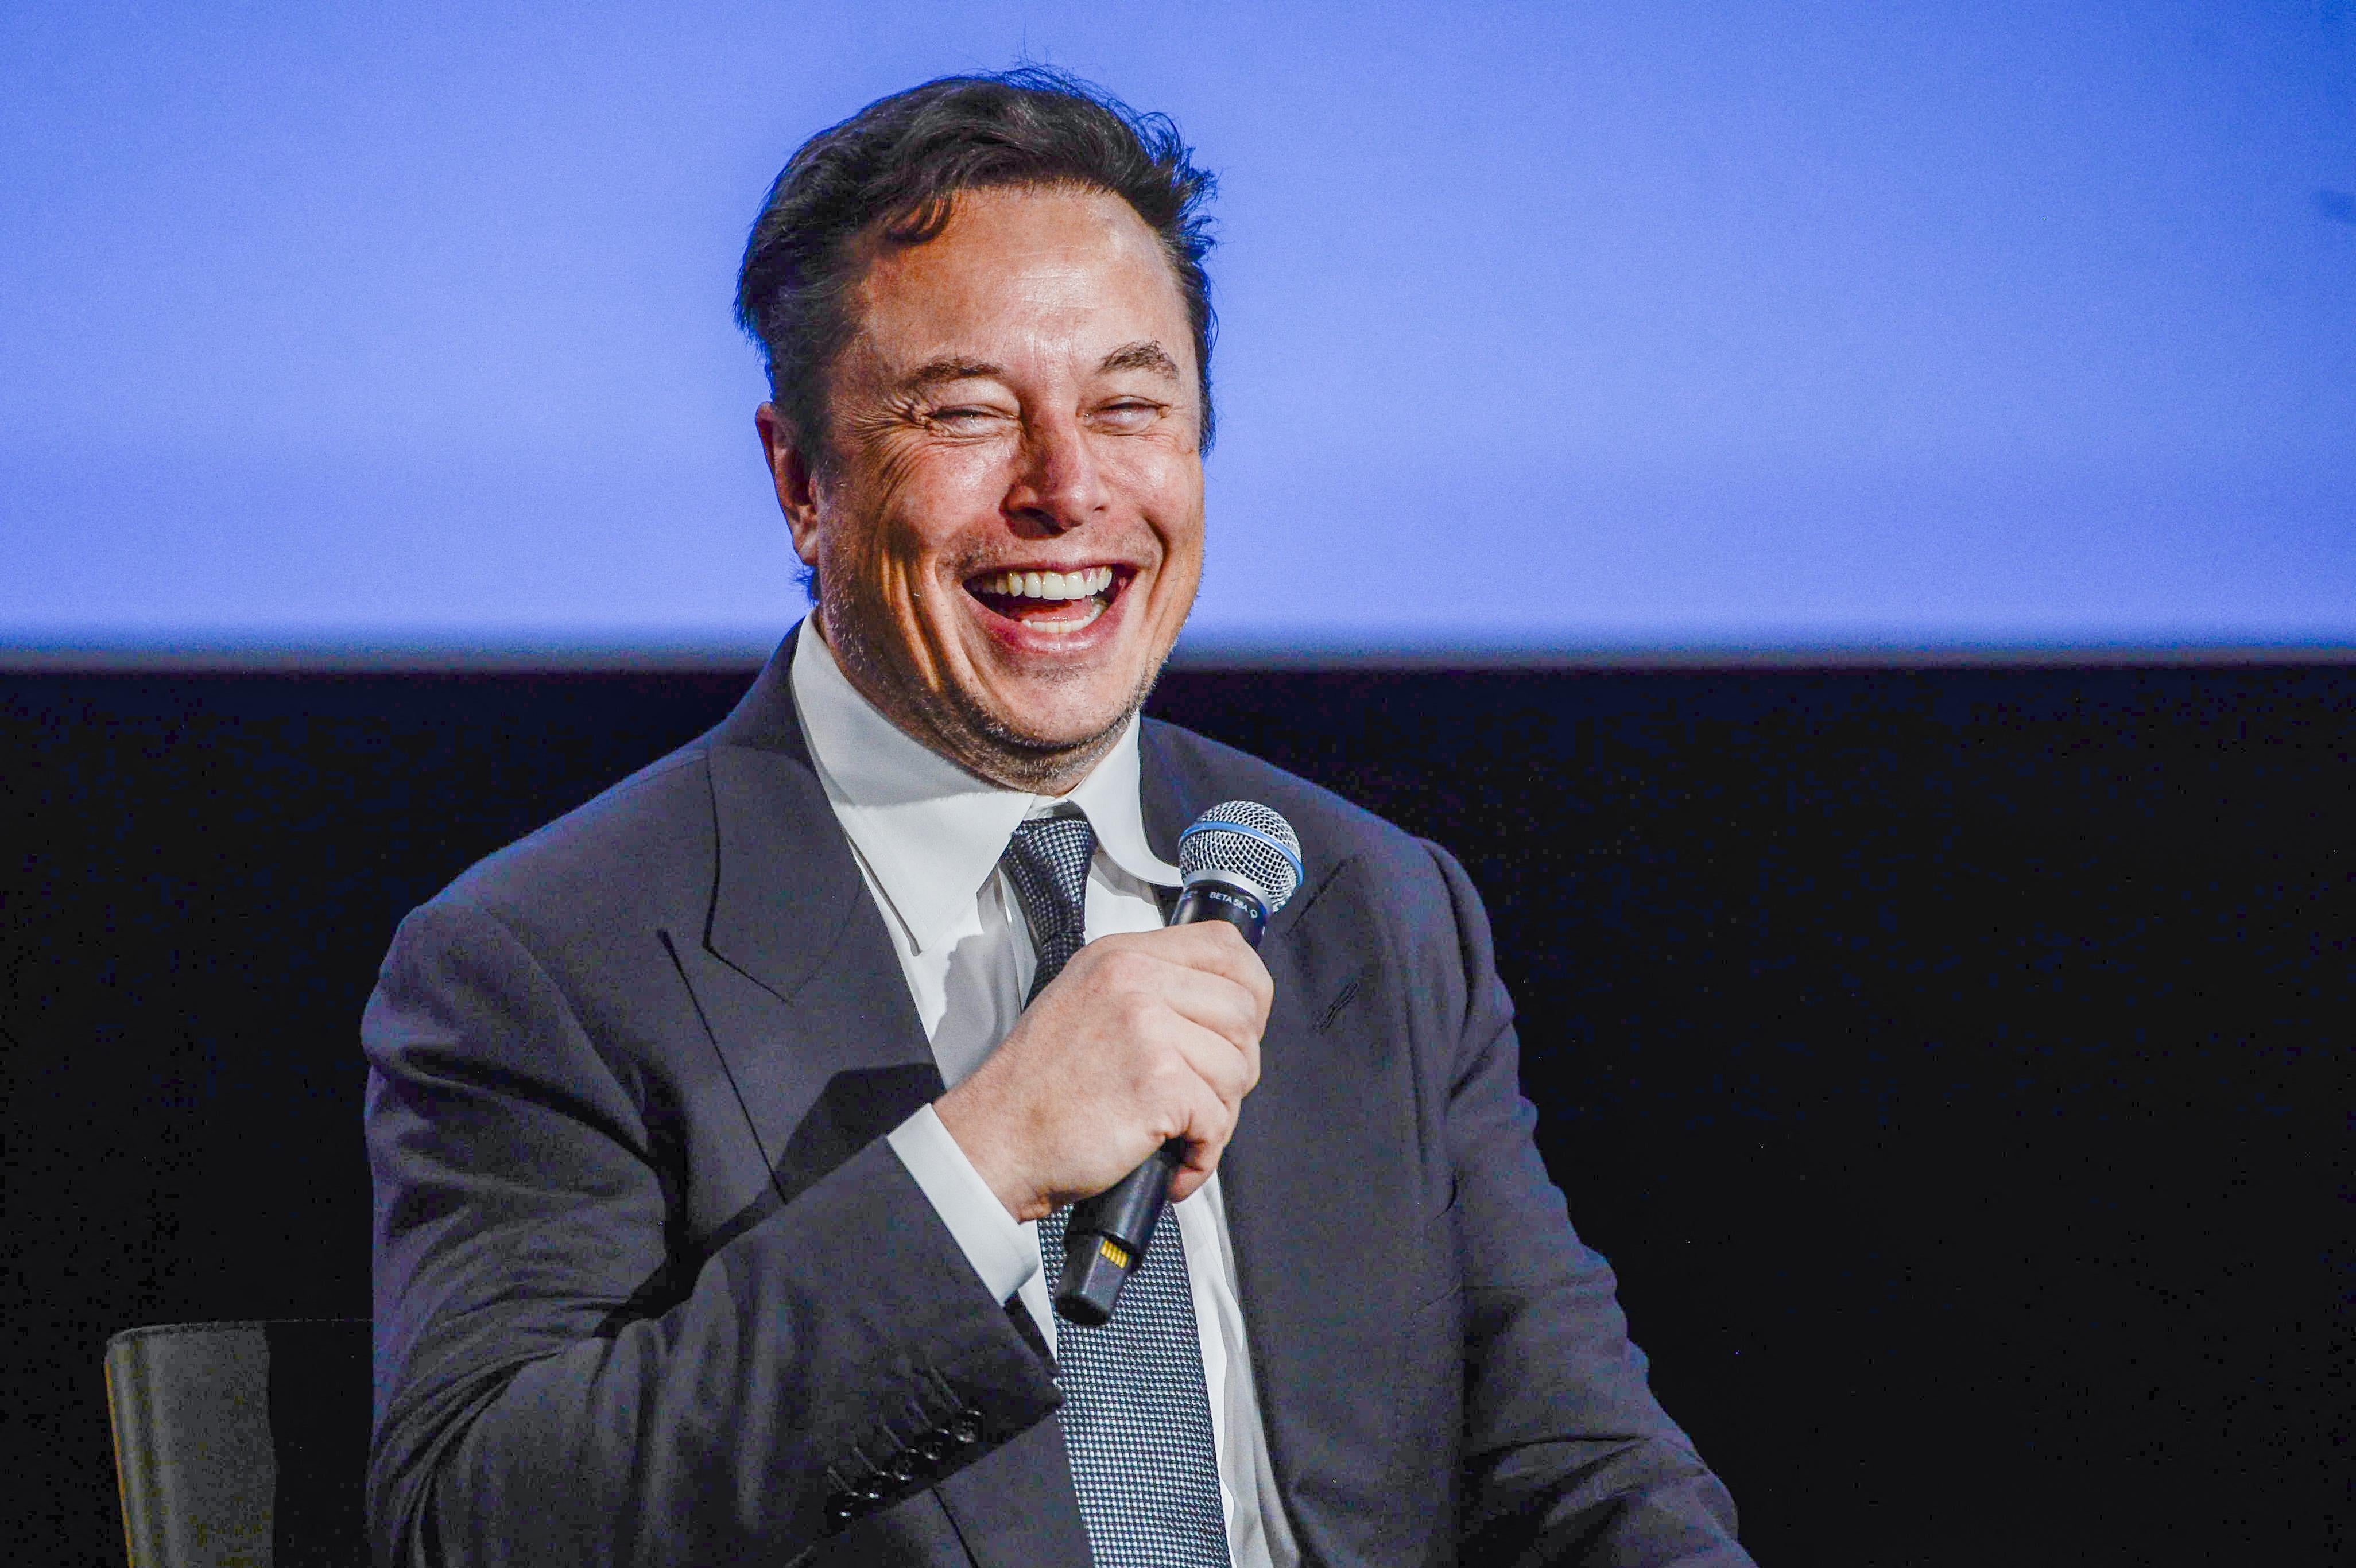 A seated Musk, wearing a suit, grins as he holds a mic on a stage.